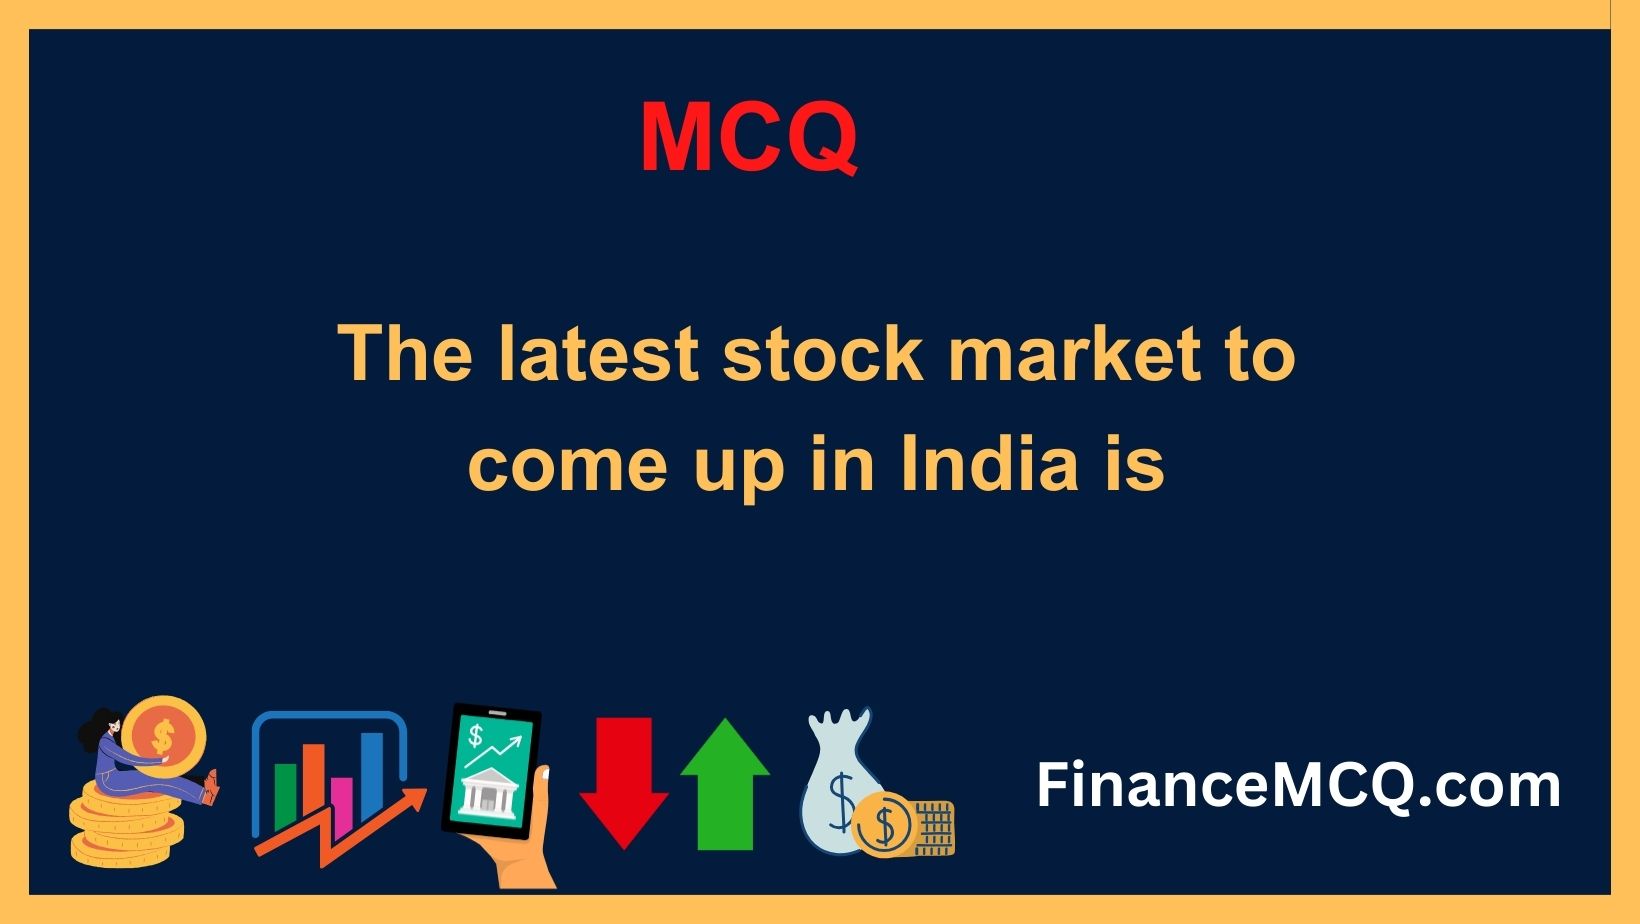 The latest stock market to come up in India is